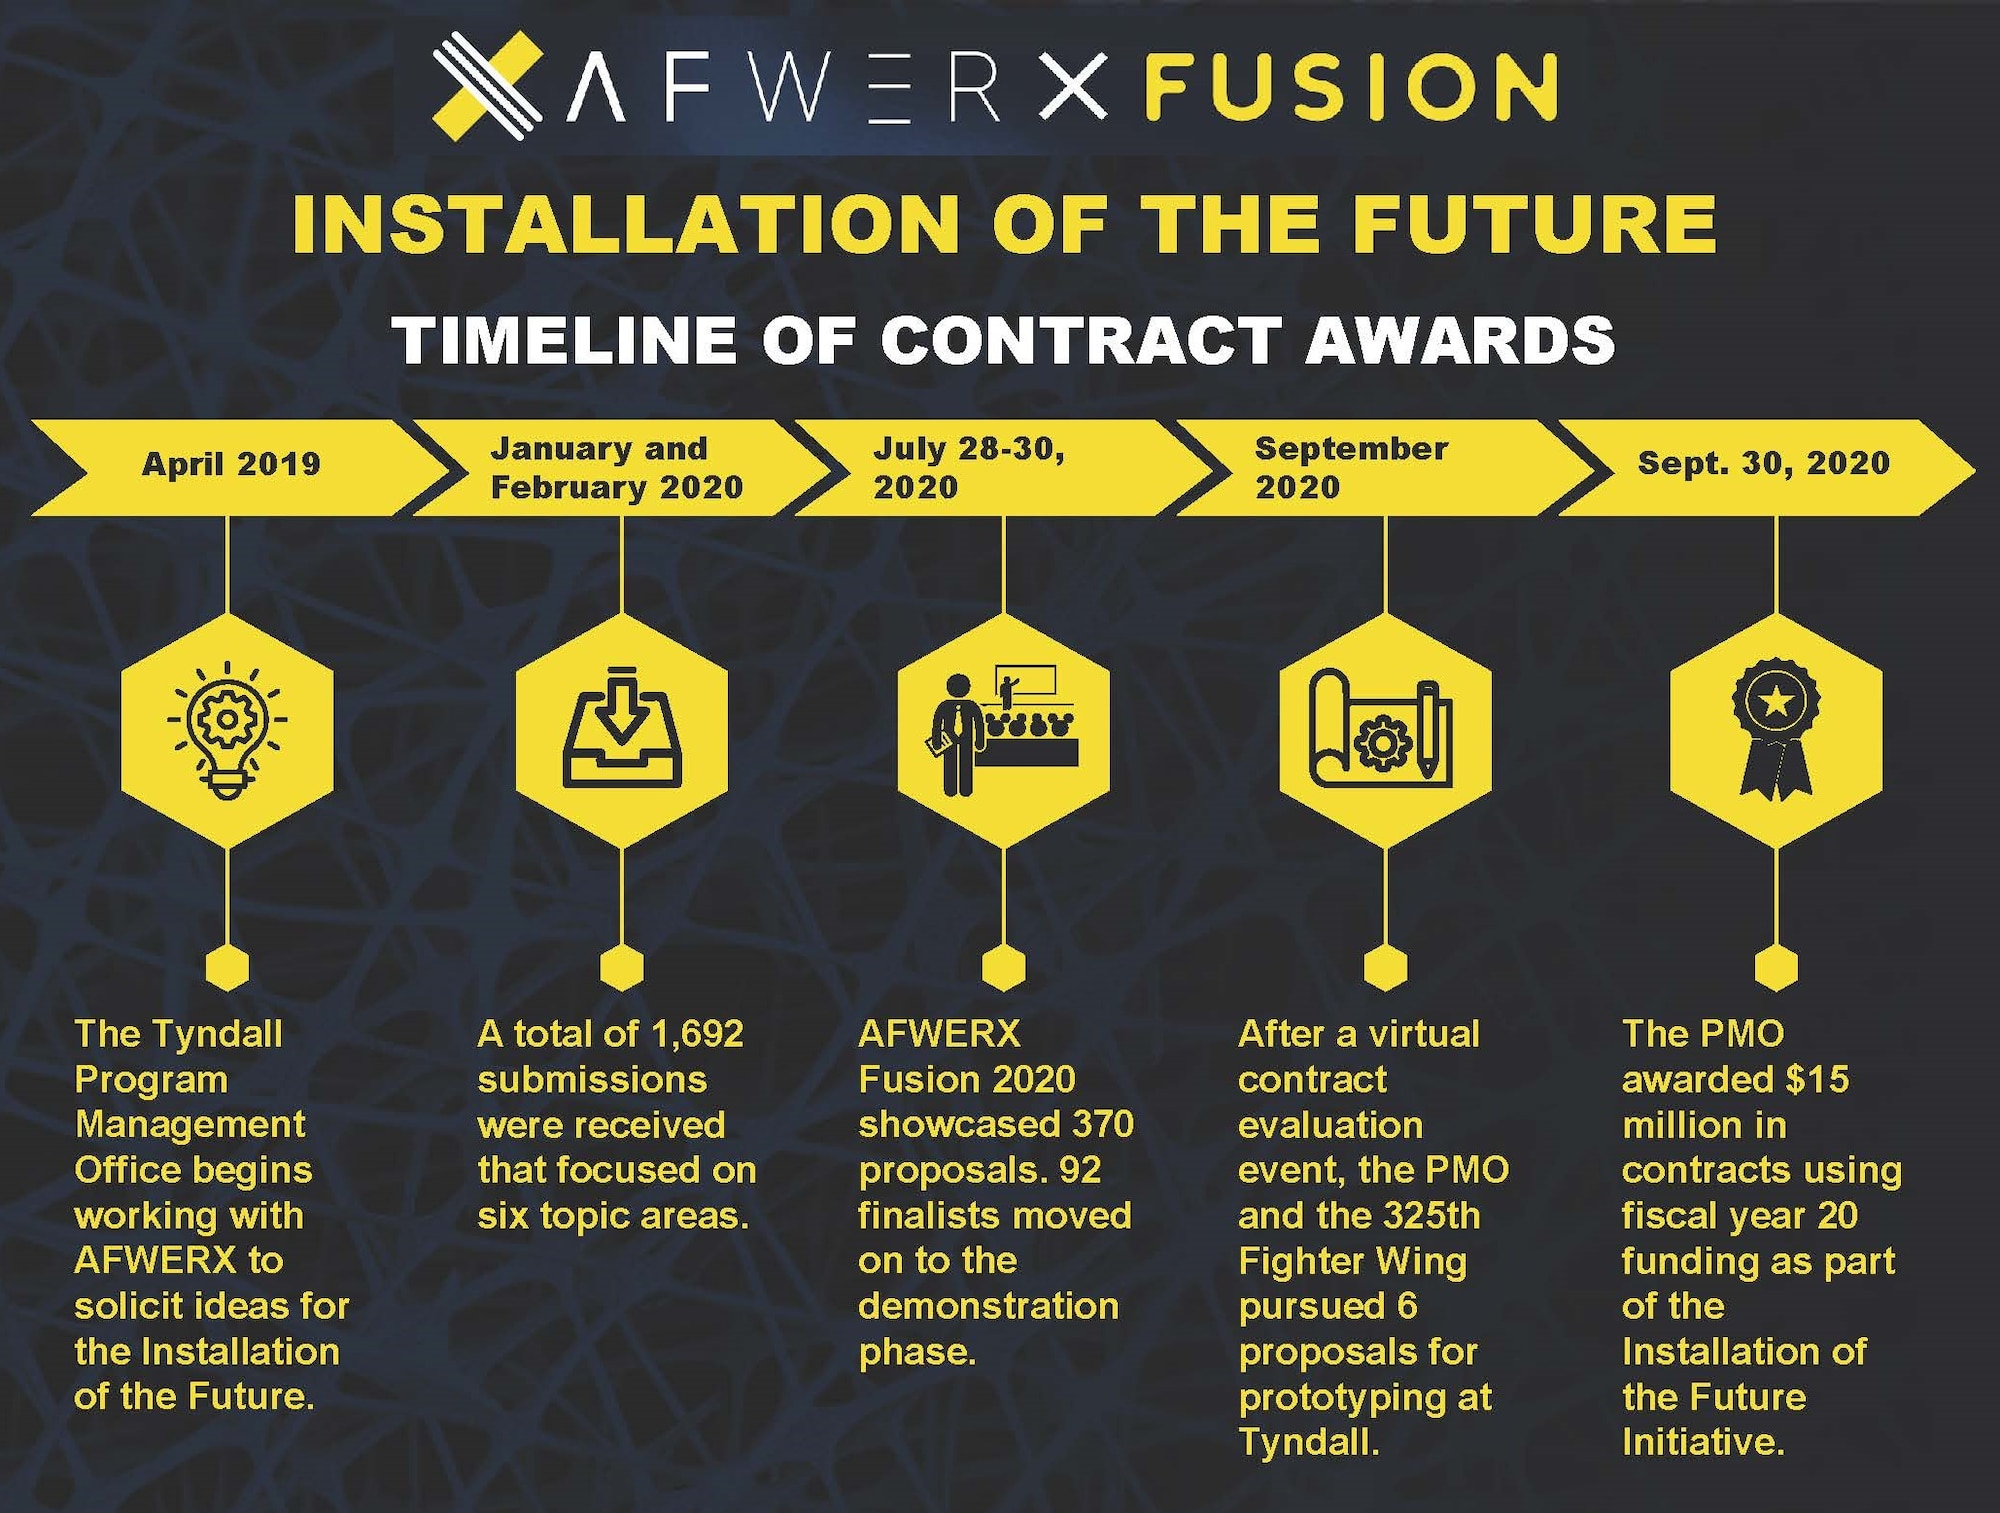 The timeline of contract awards as part of AFWERX Fusion event.